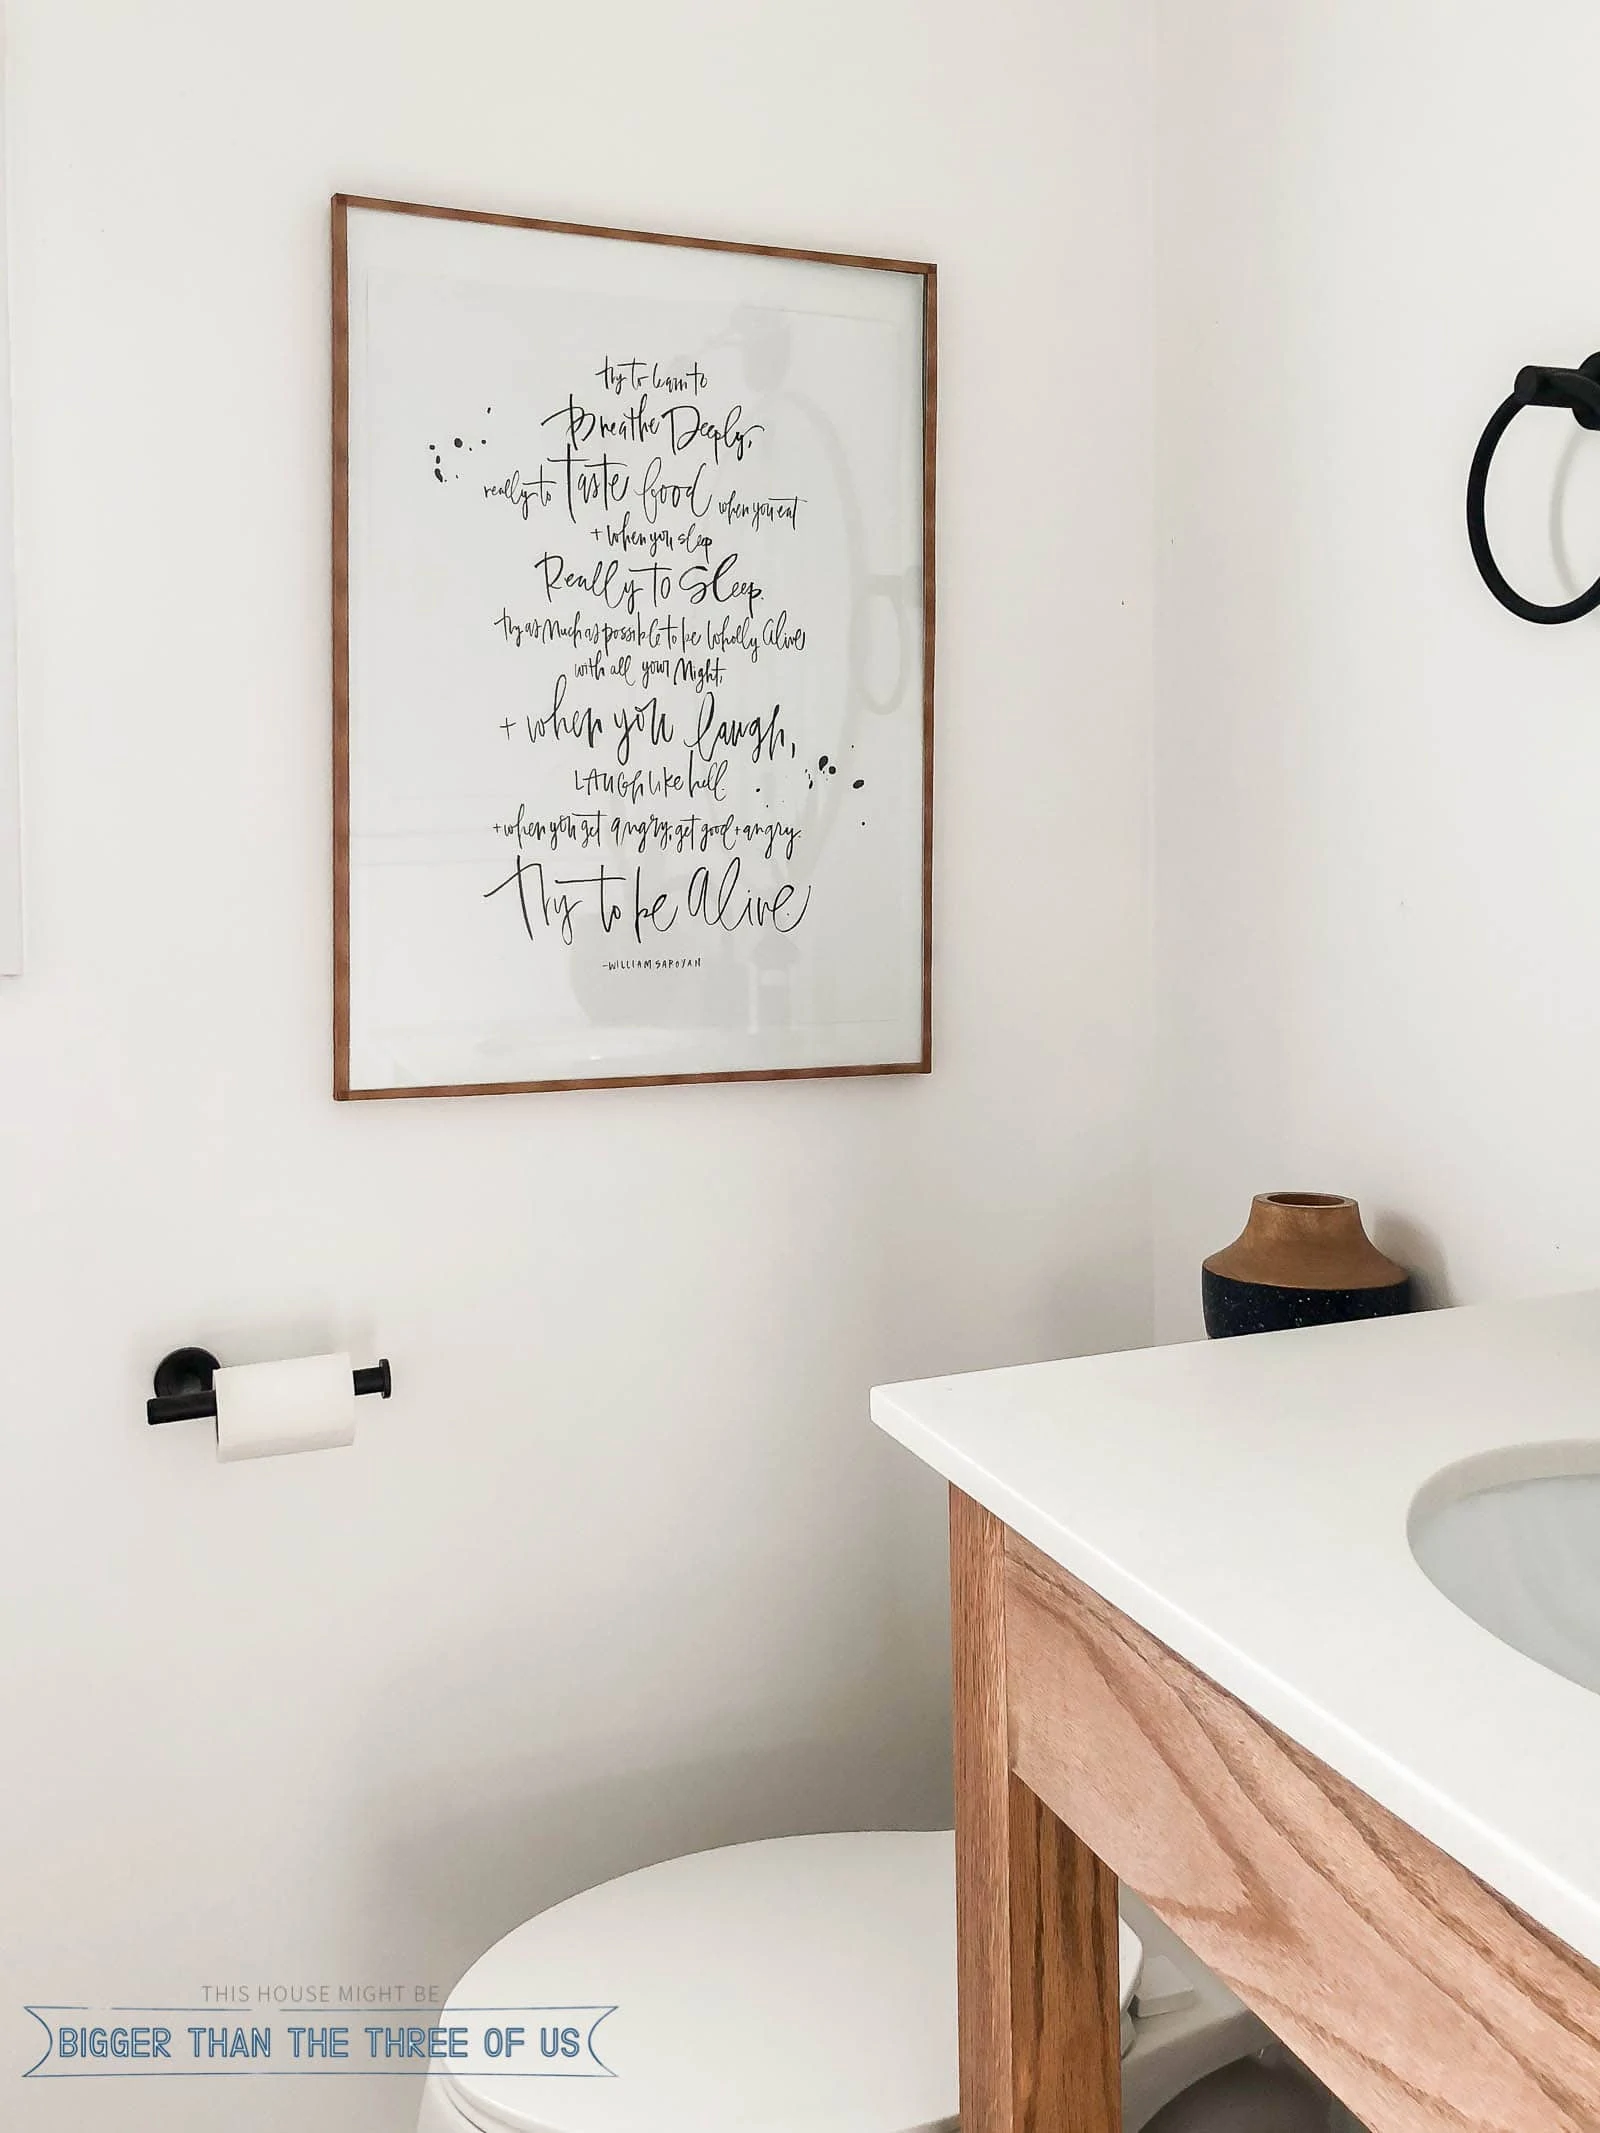 DIY wood picture frame being shown on white wall in bathroom.